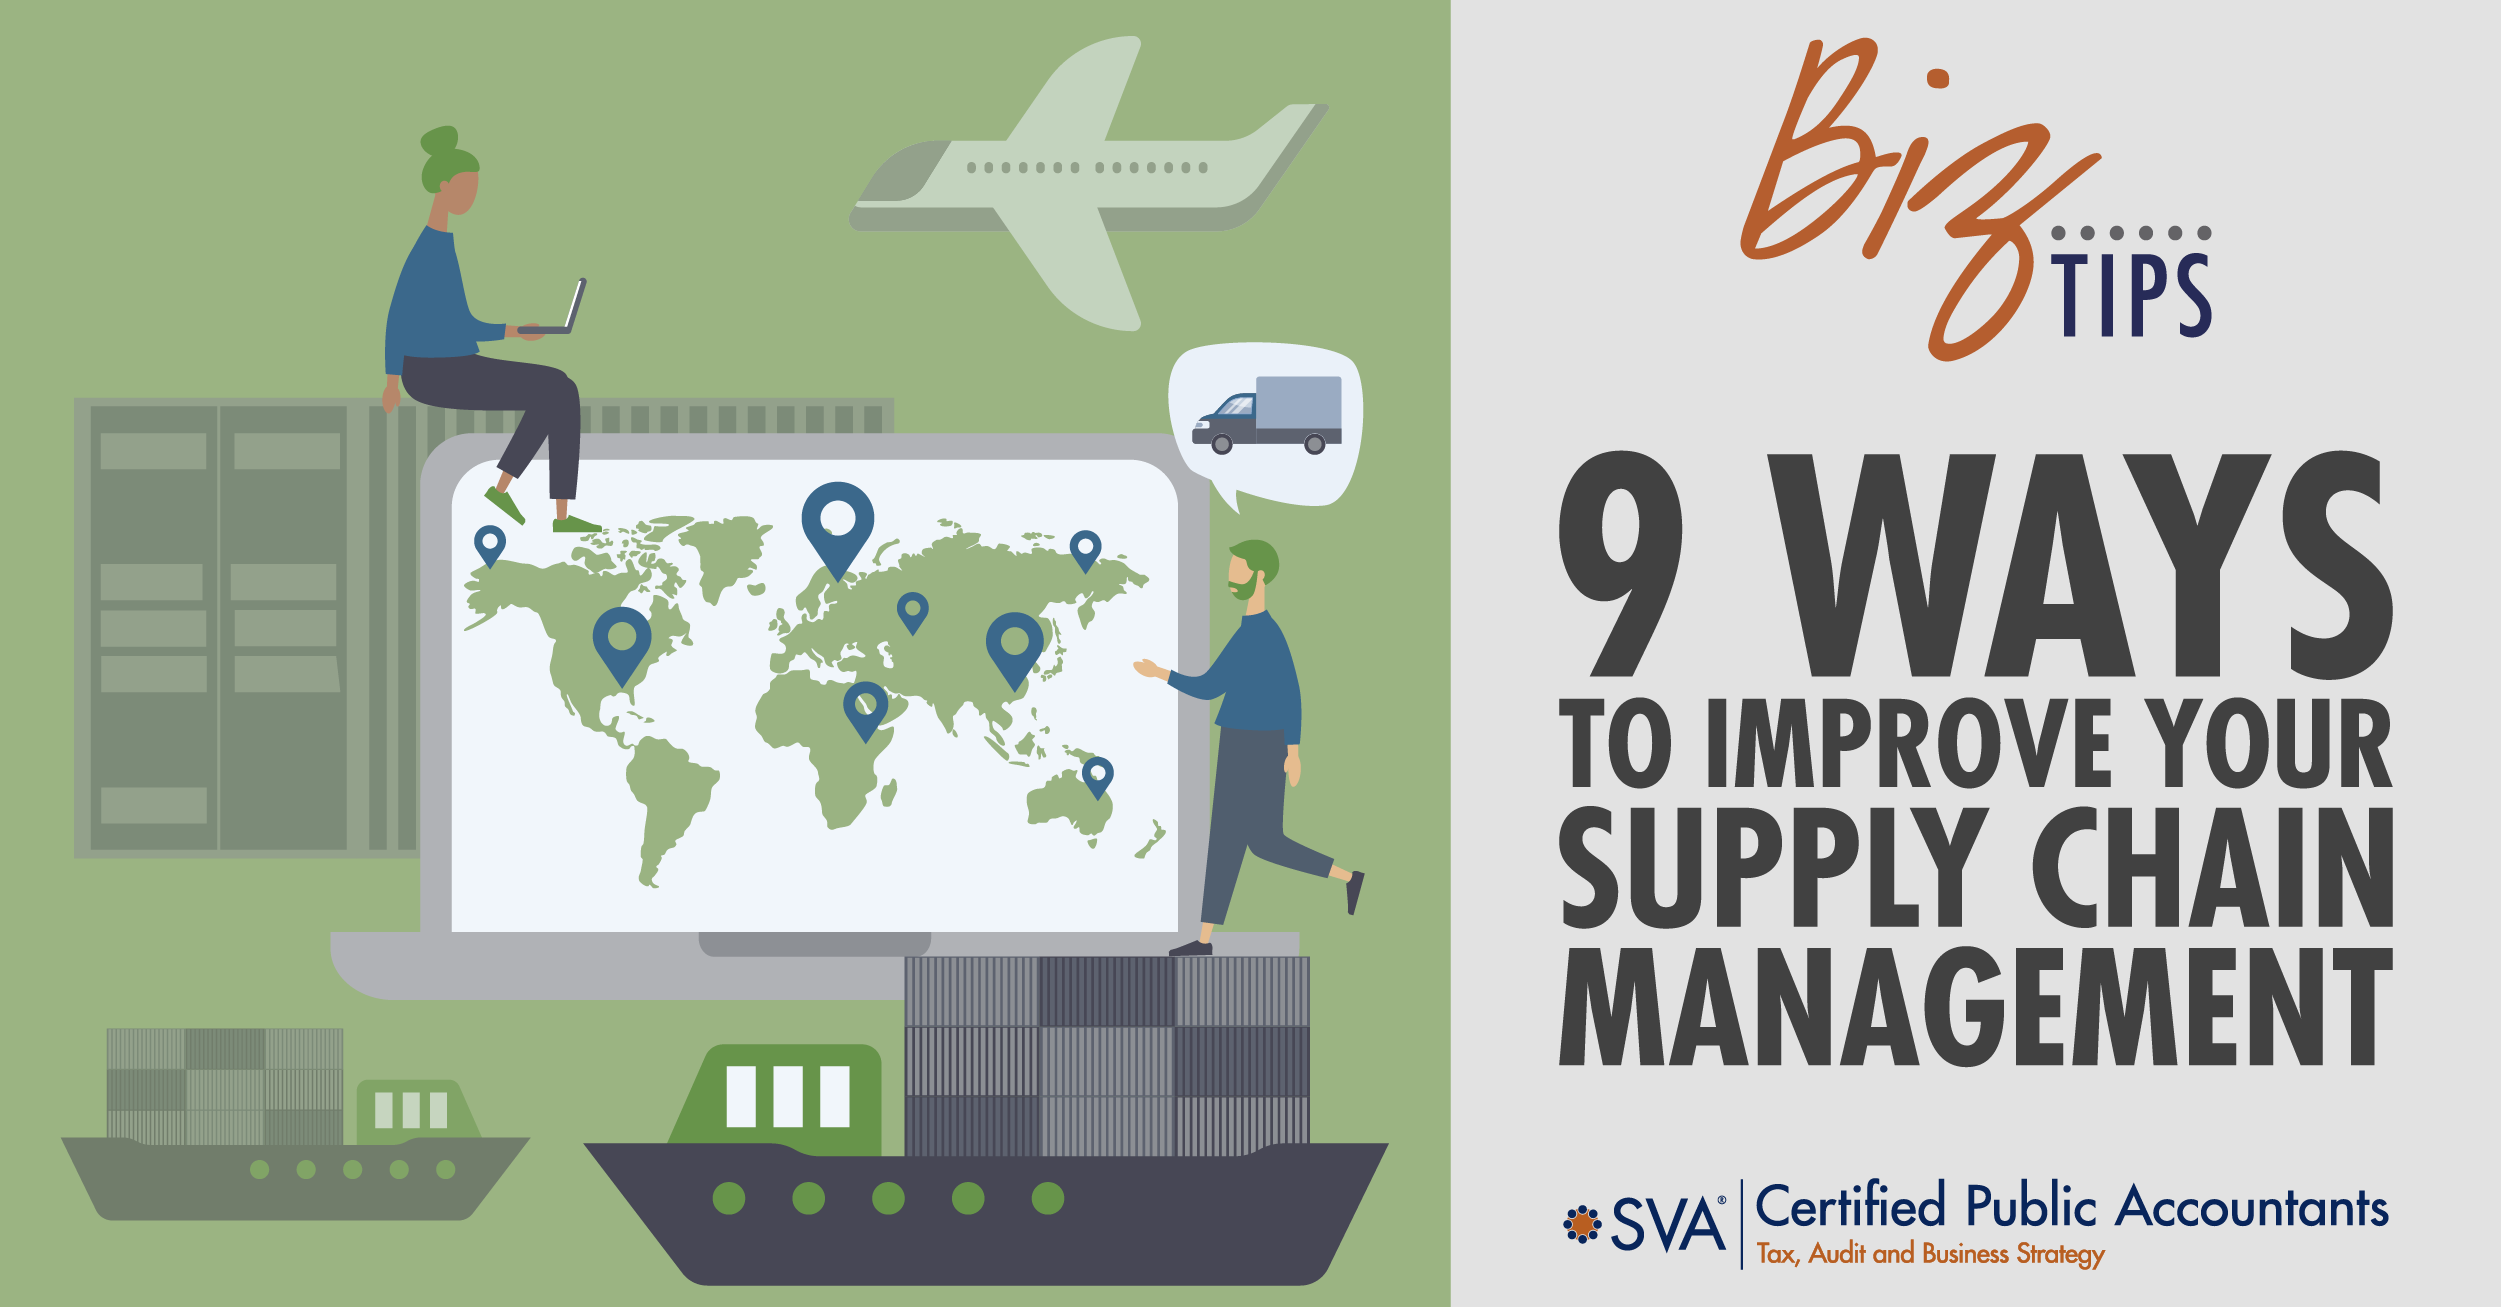 9 Ways to Improve Your Supply Chain Management